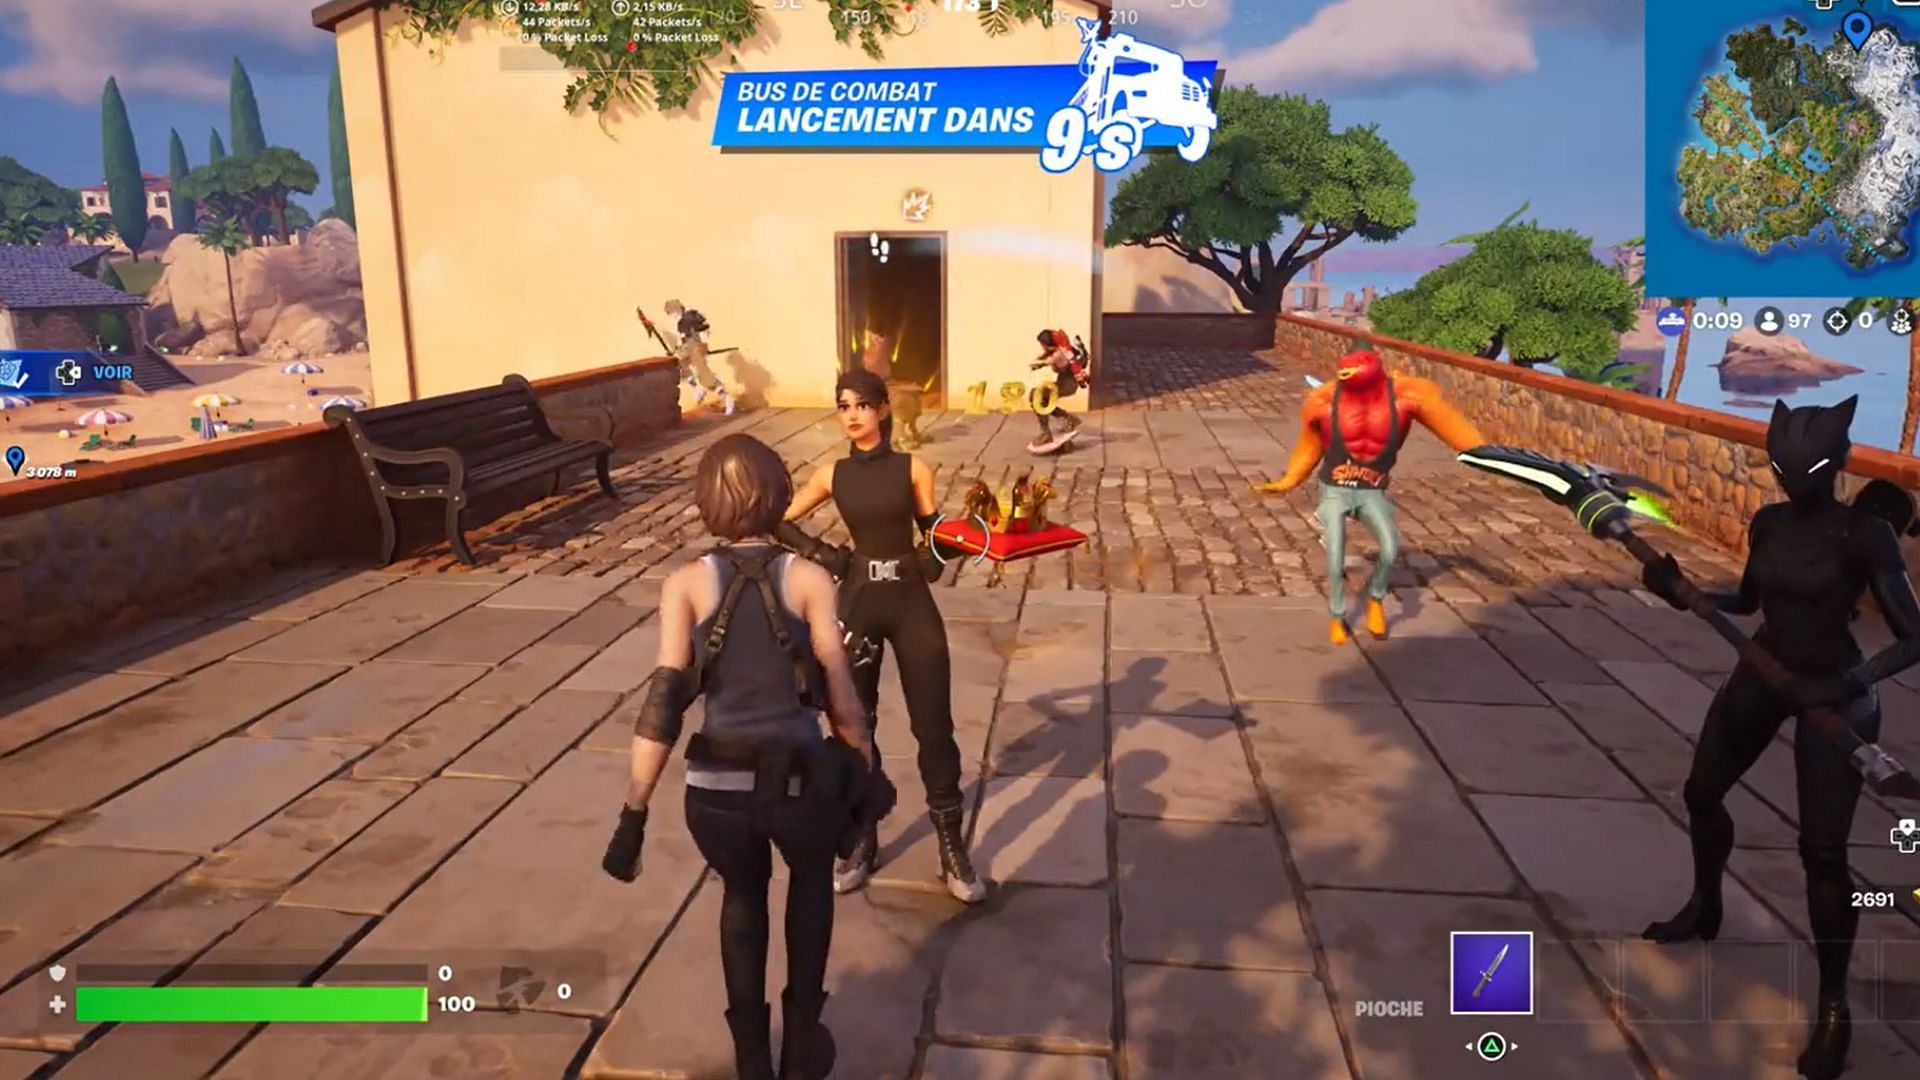 &quot;That Griddy felt personal&quot;: Fortnite player hunts down and eliminates opponent who interrupted their Emote